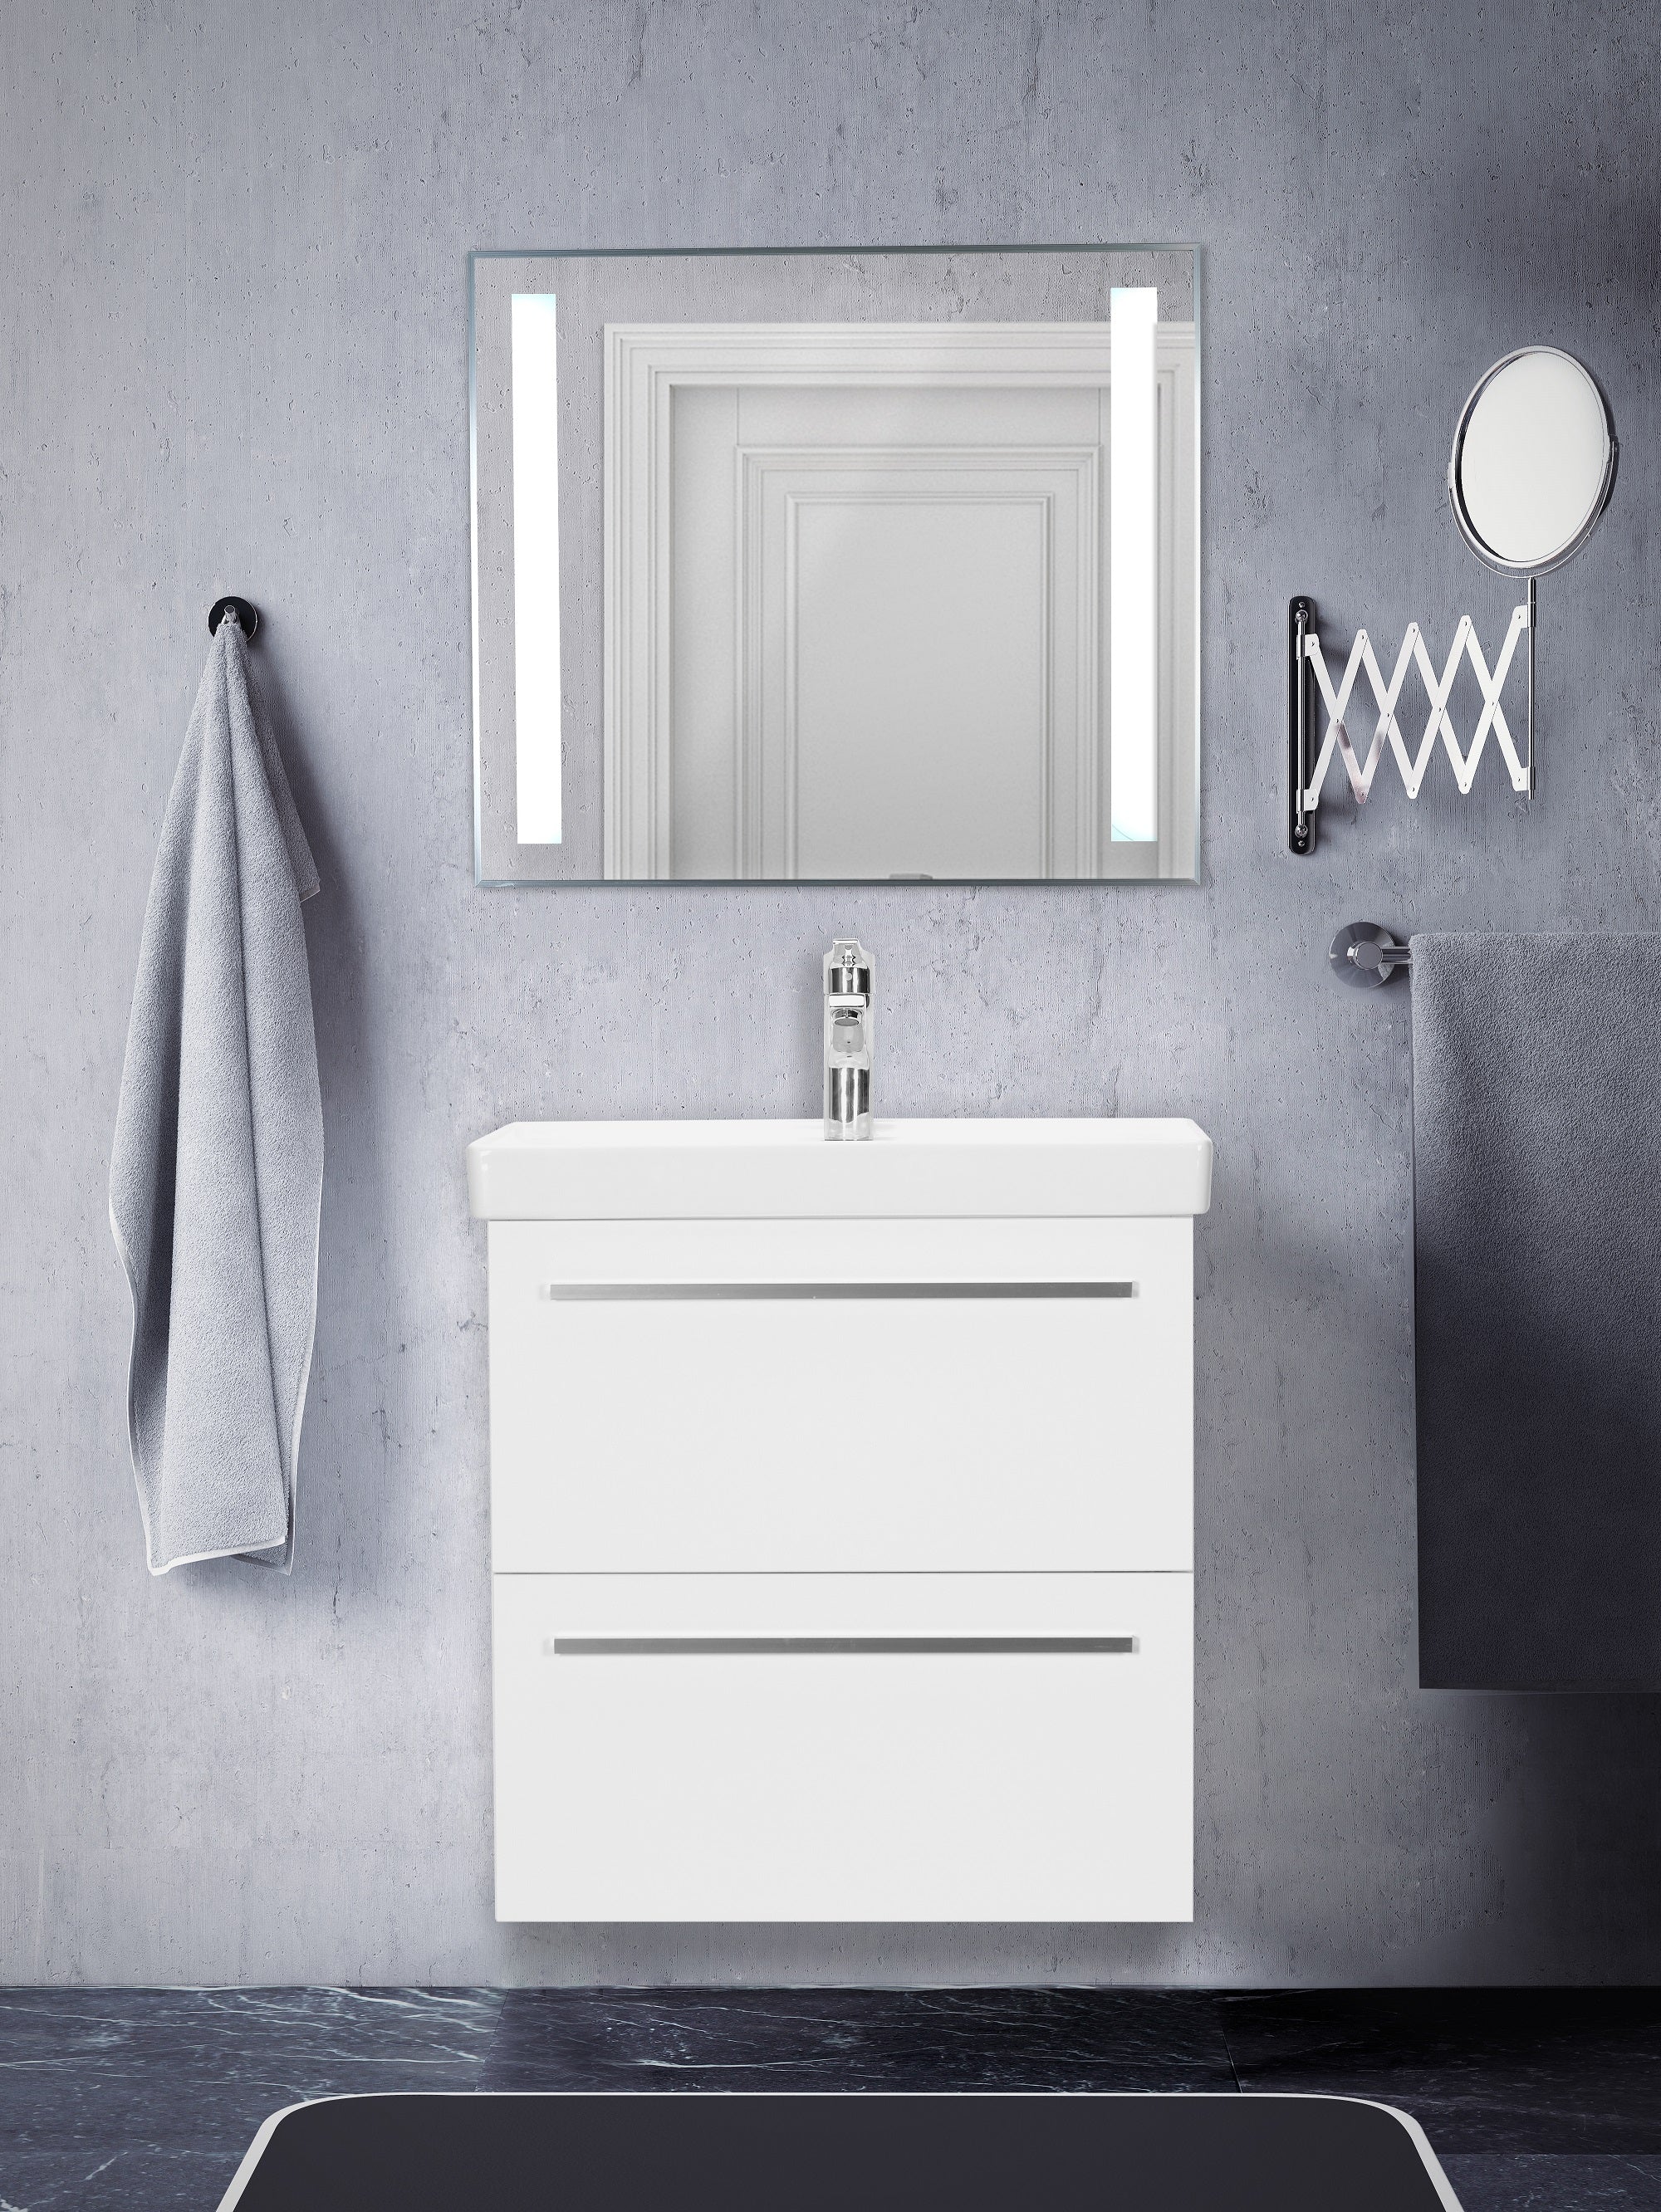 FIORE 24 INCH MODERN WALL MOUNT VANITY AND SINK COMBO WITH LED MIRROR - GLOSSY WHITE